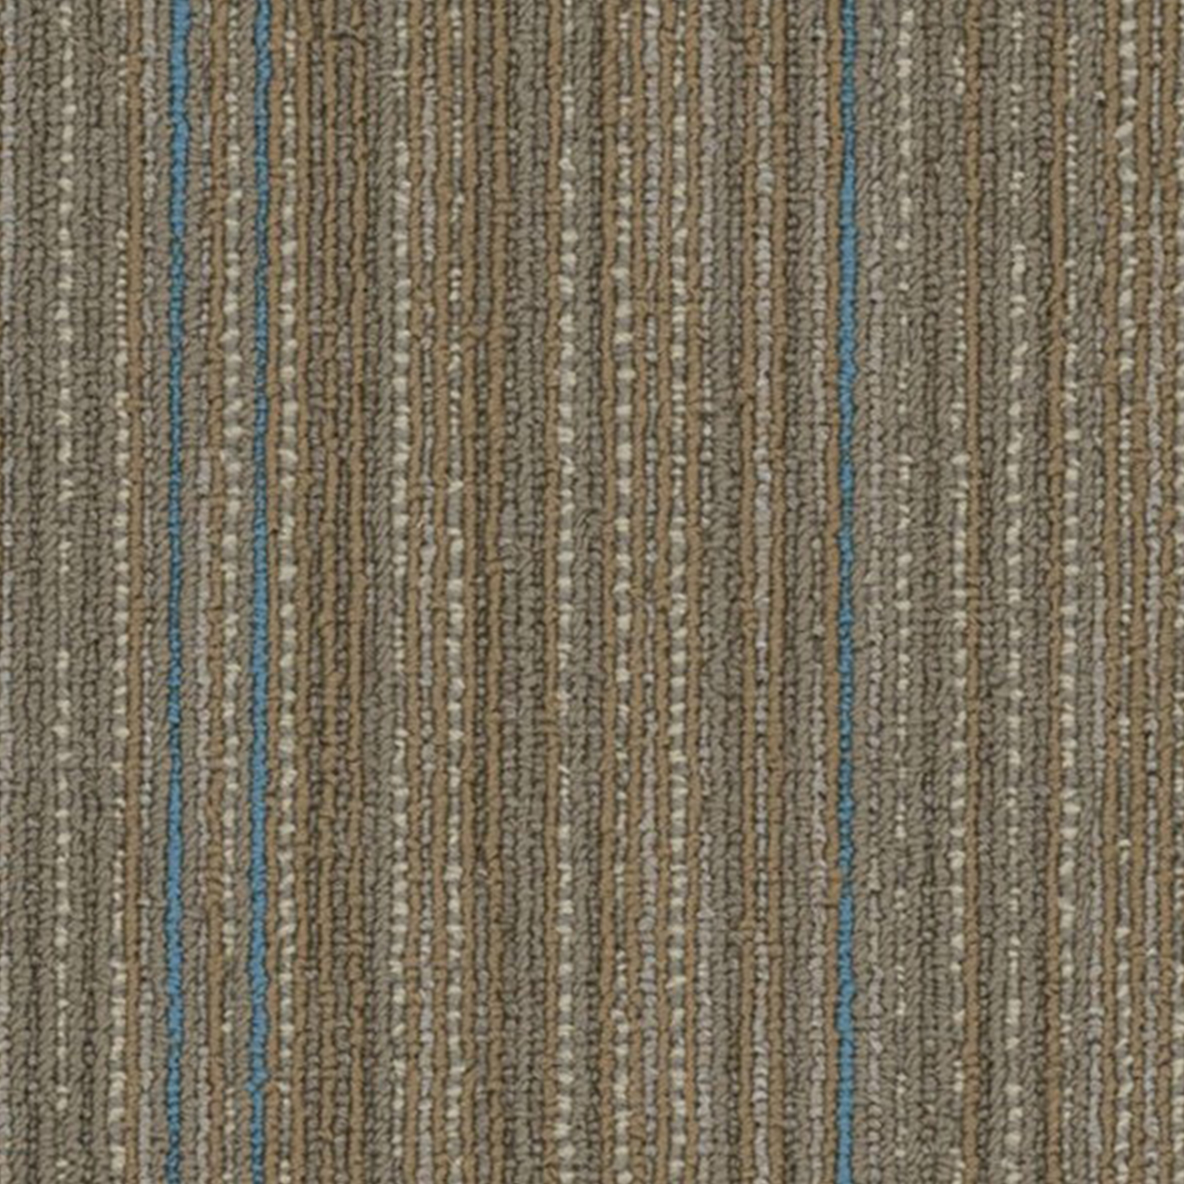 Higher Calling Commercial Carpet Plank .23 Inch x 9x36 Inches 20 per Carton Imaginary color close up